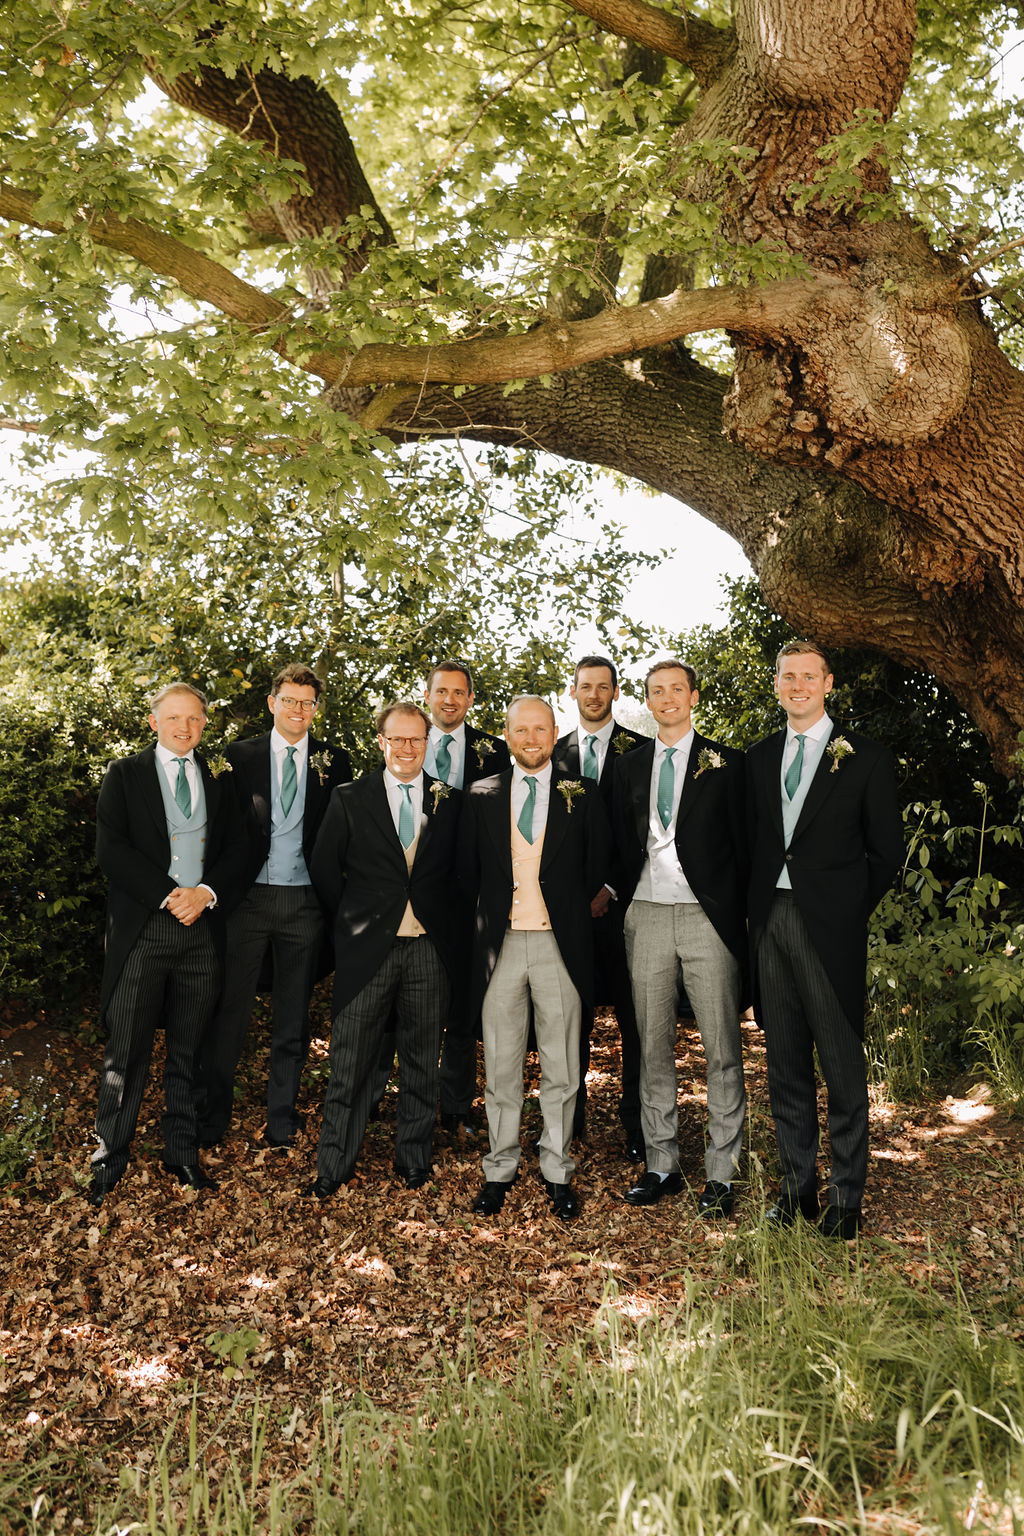 Eight adult men wearing morning dress and green ties for a wedding pose for the camera outside under a huge oak tree